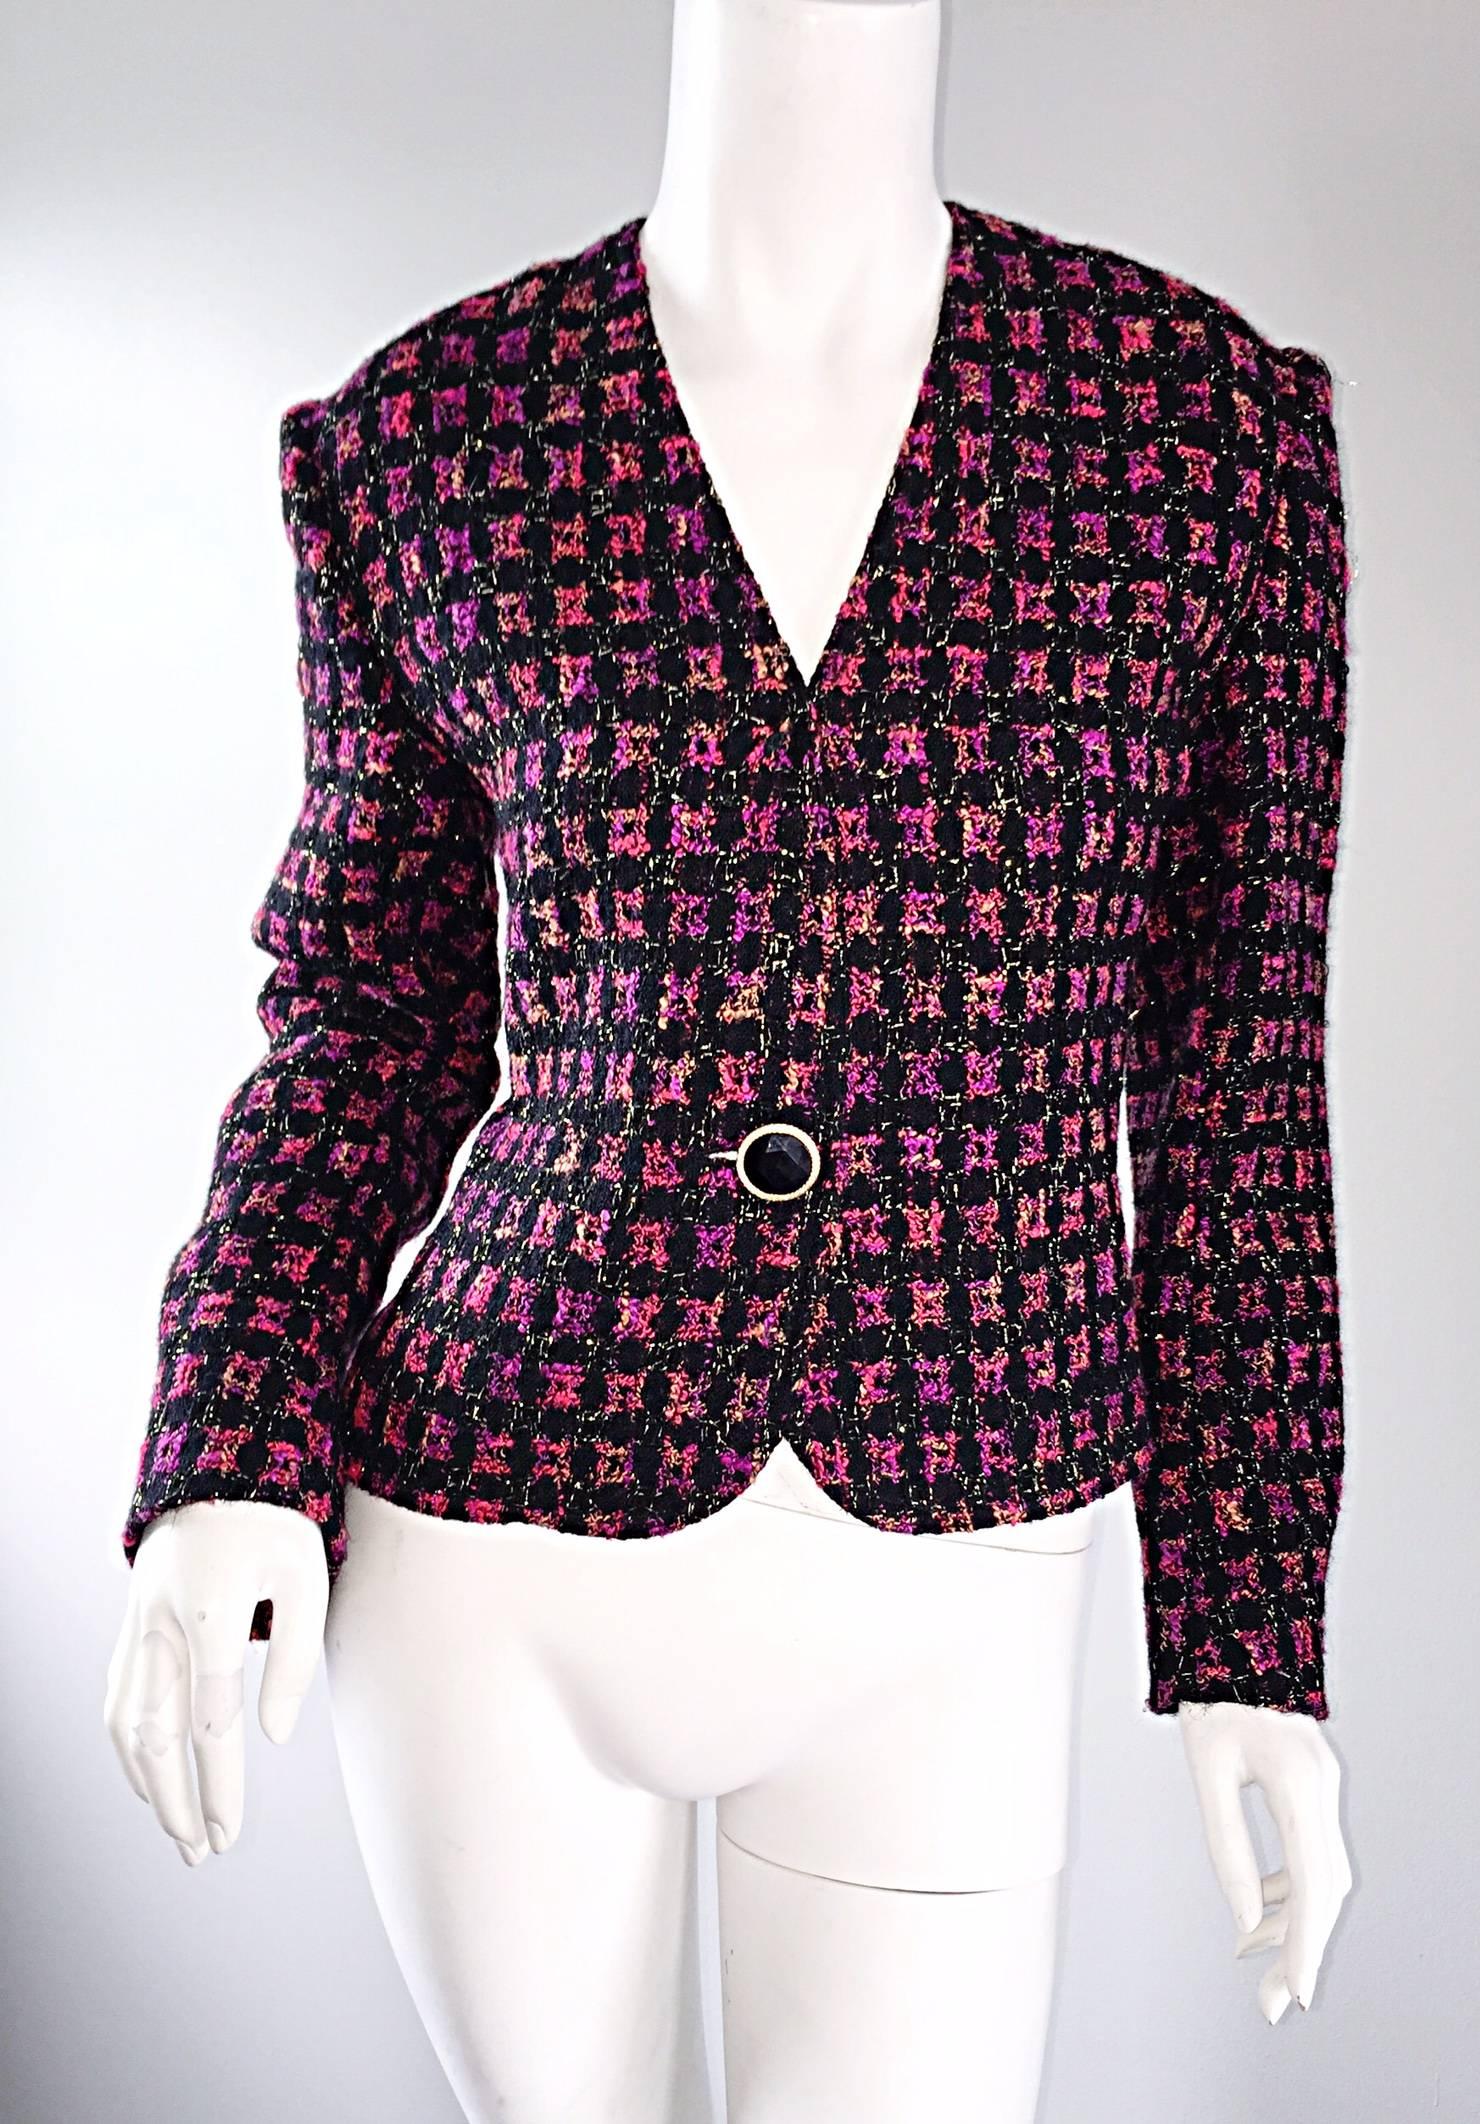 Beautiful vintage 90s Jaeger 'Fantasy Tweed' metallic multi-colored fitted blazer! Wonderful checkered print in purple, pink and black! Large single black opal button at waist, with hidden hook-and-eye below bust. Extremely versatile: Looks great